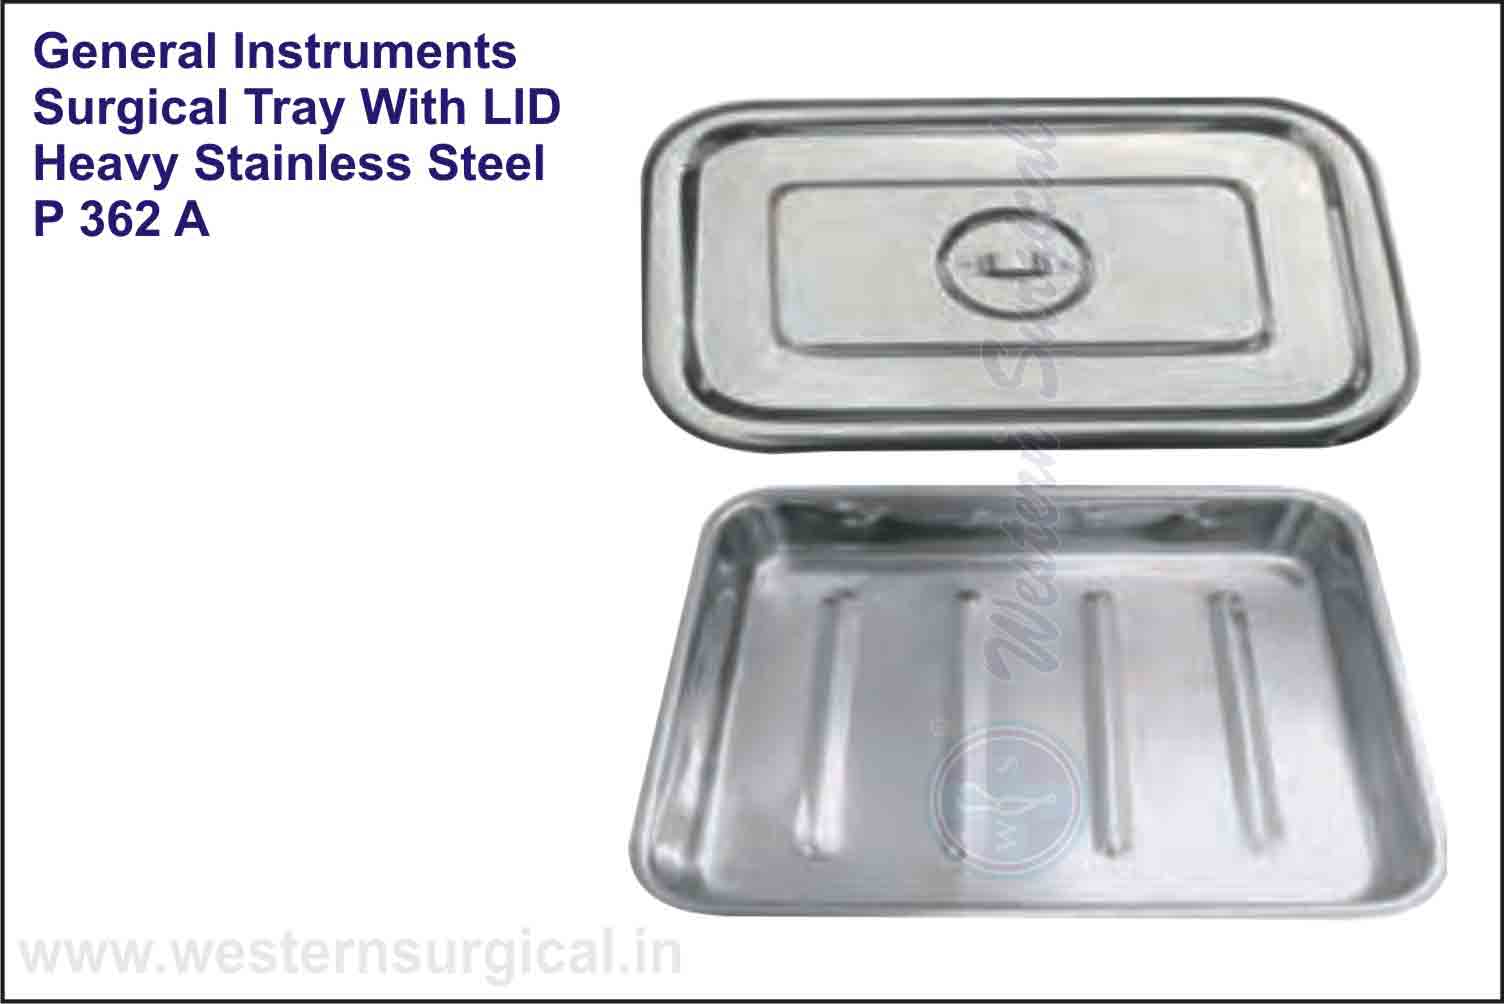 SURGICAL TRAY WITH LTD HEAVY STAINLESS STEEL